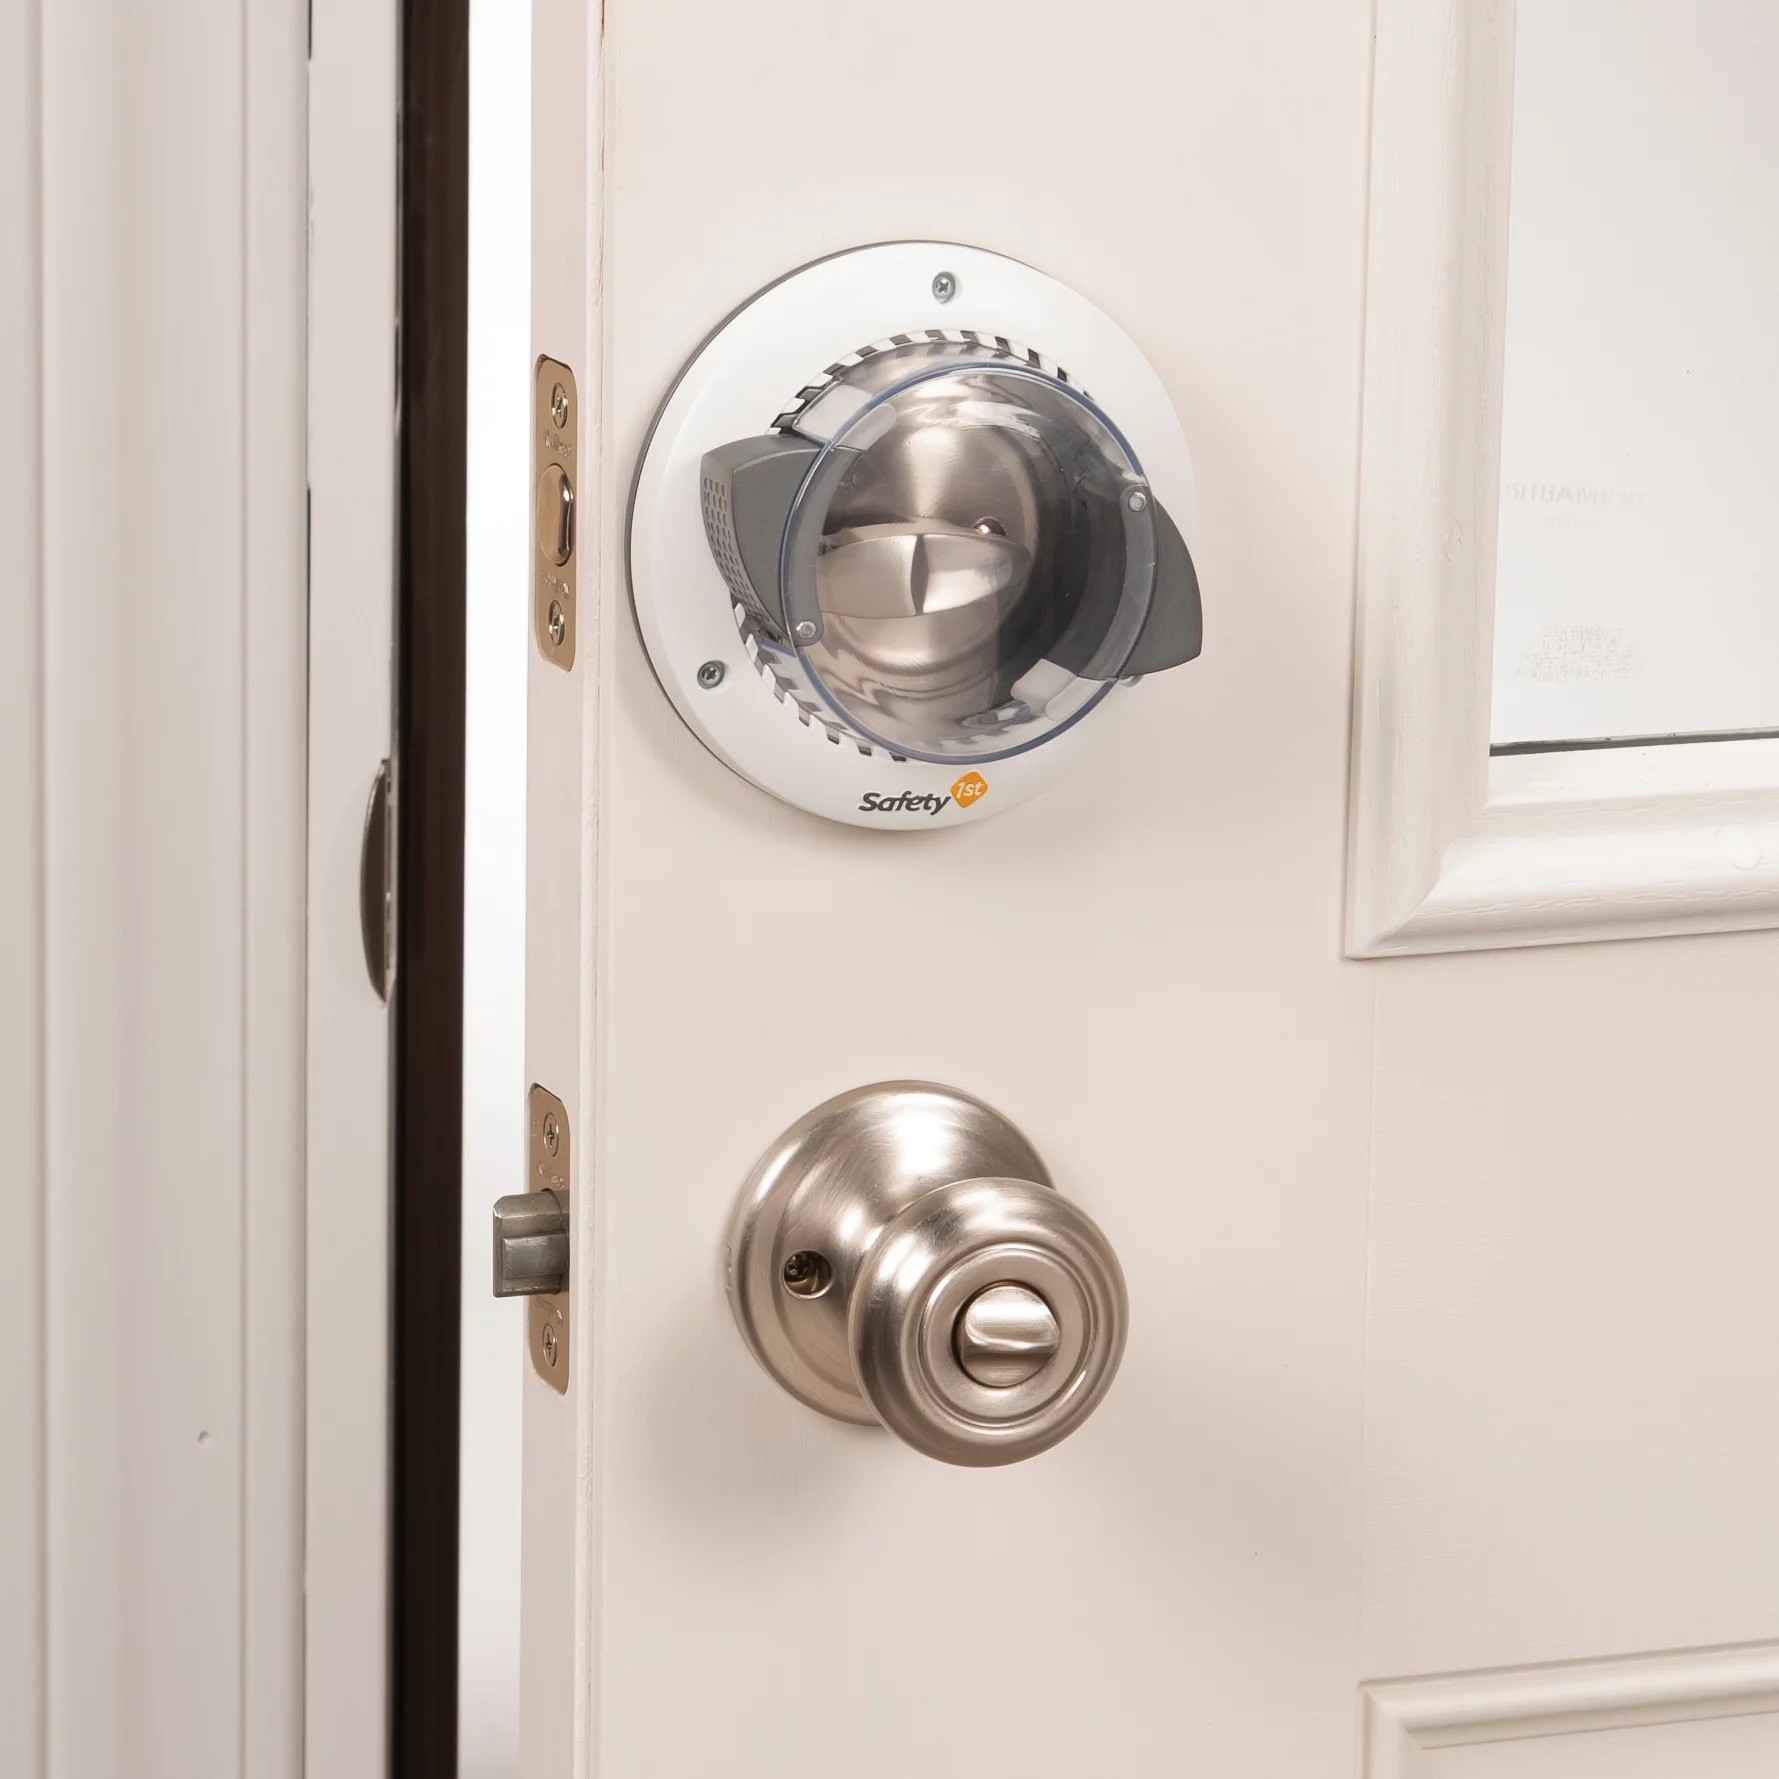 How To Childproof A Deadbolt Lock